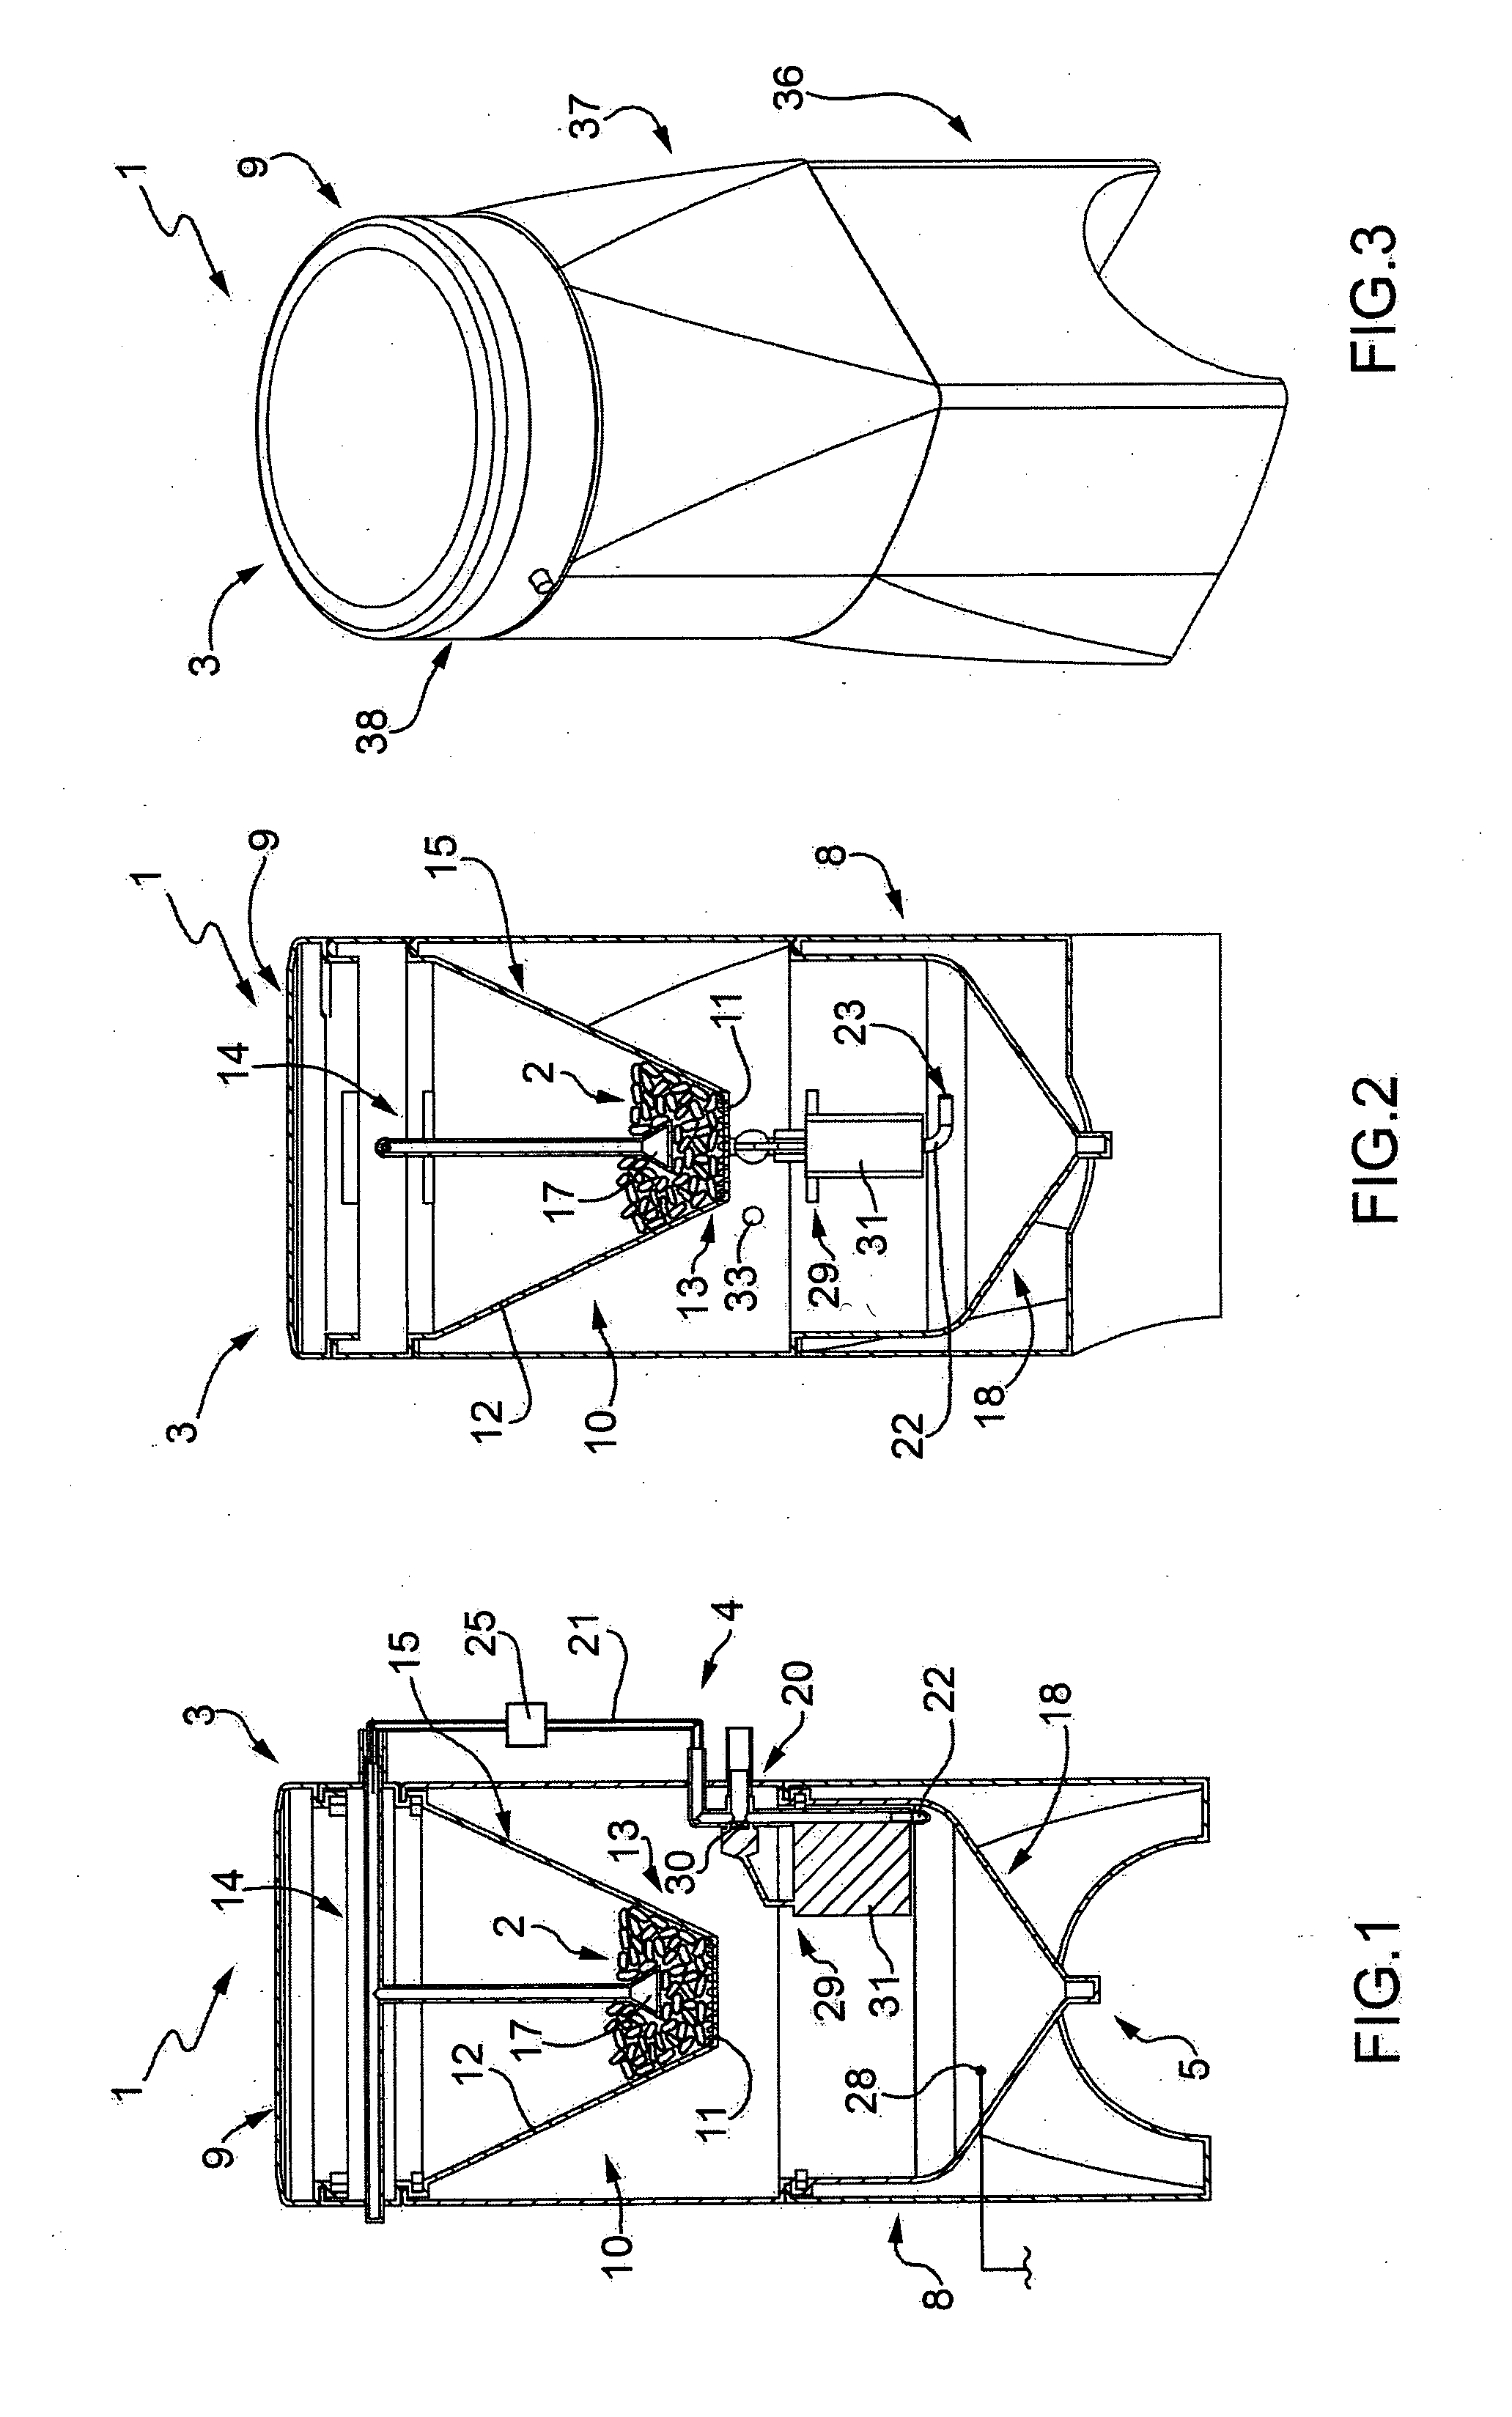 Method and device for dissolving solid substances in water